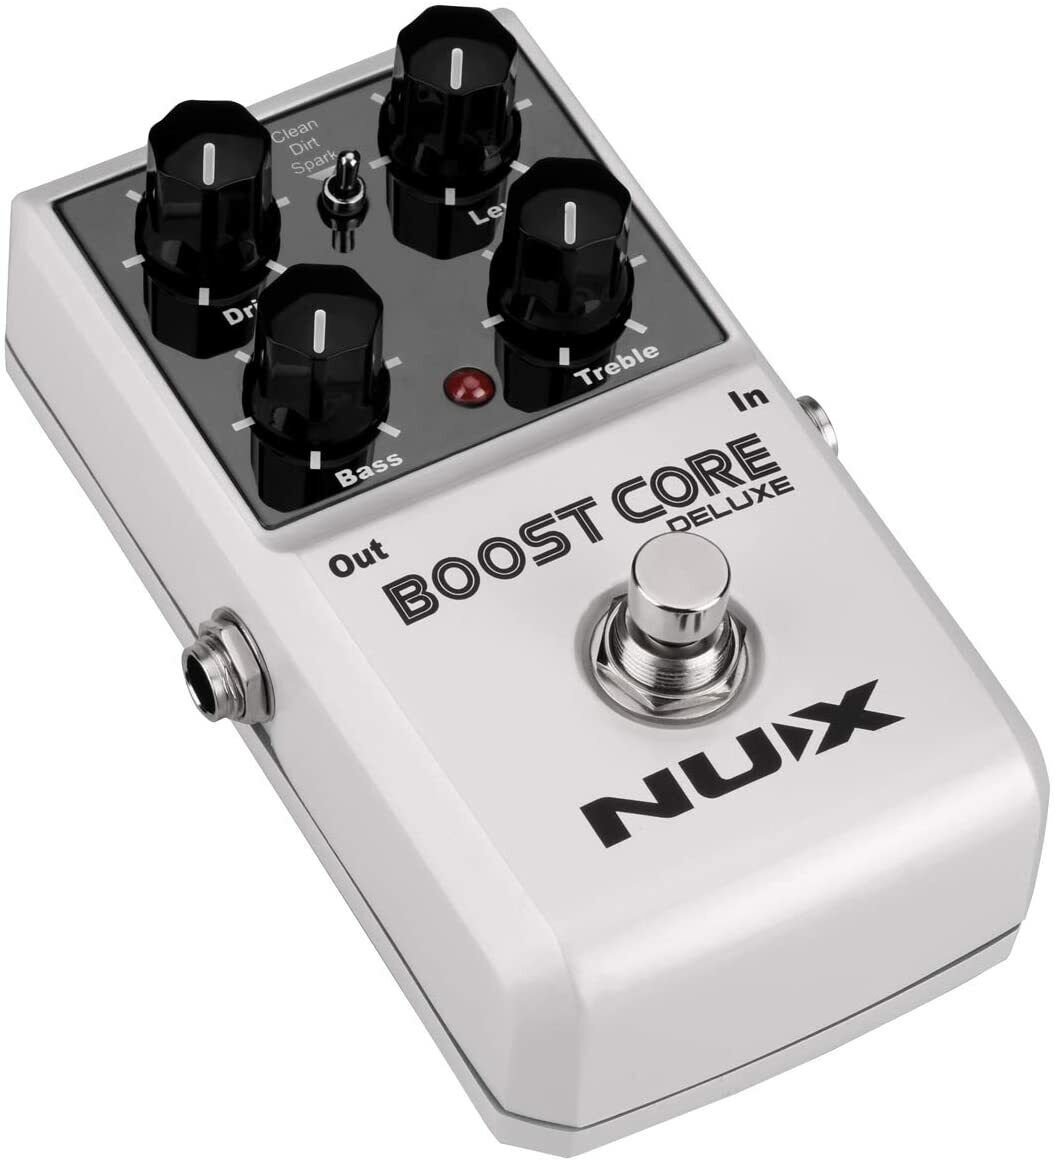 Nux Boost Core Deluxe Analog Booster Guitar Effects Pedal ( Free Shipping!! )